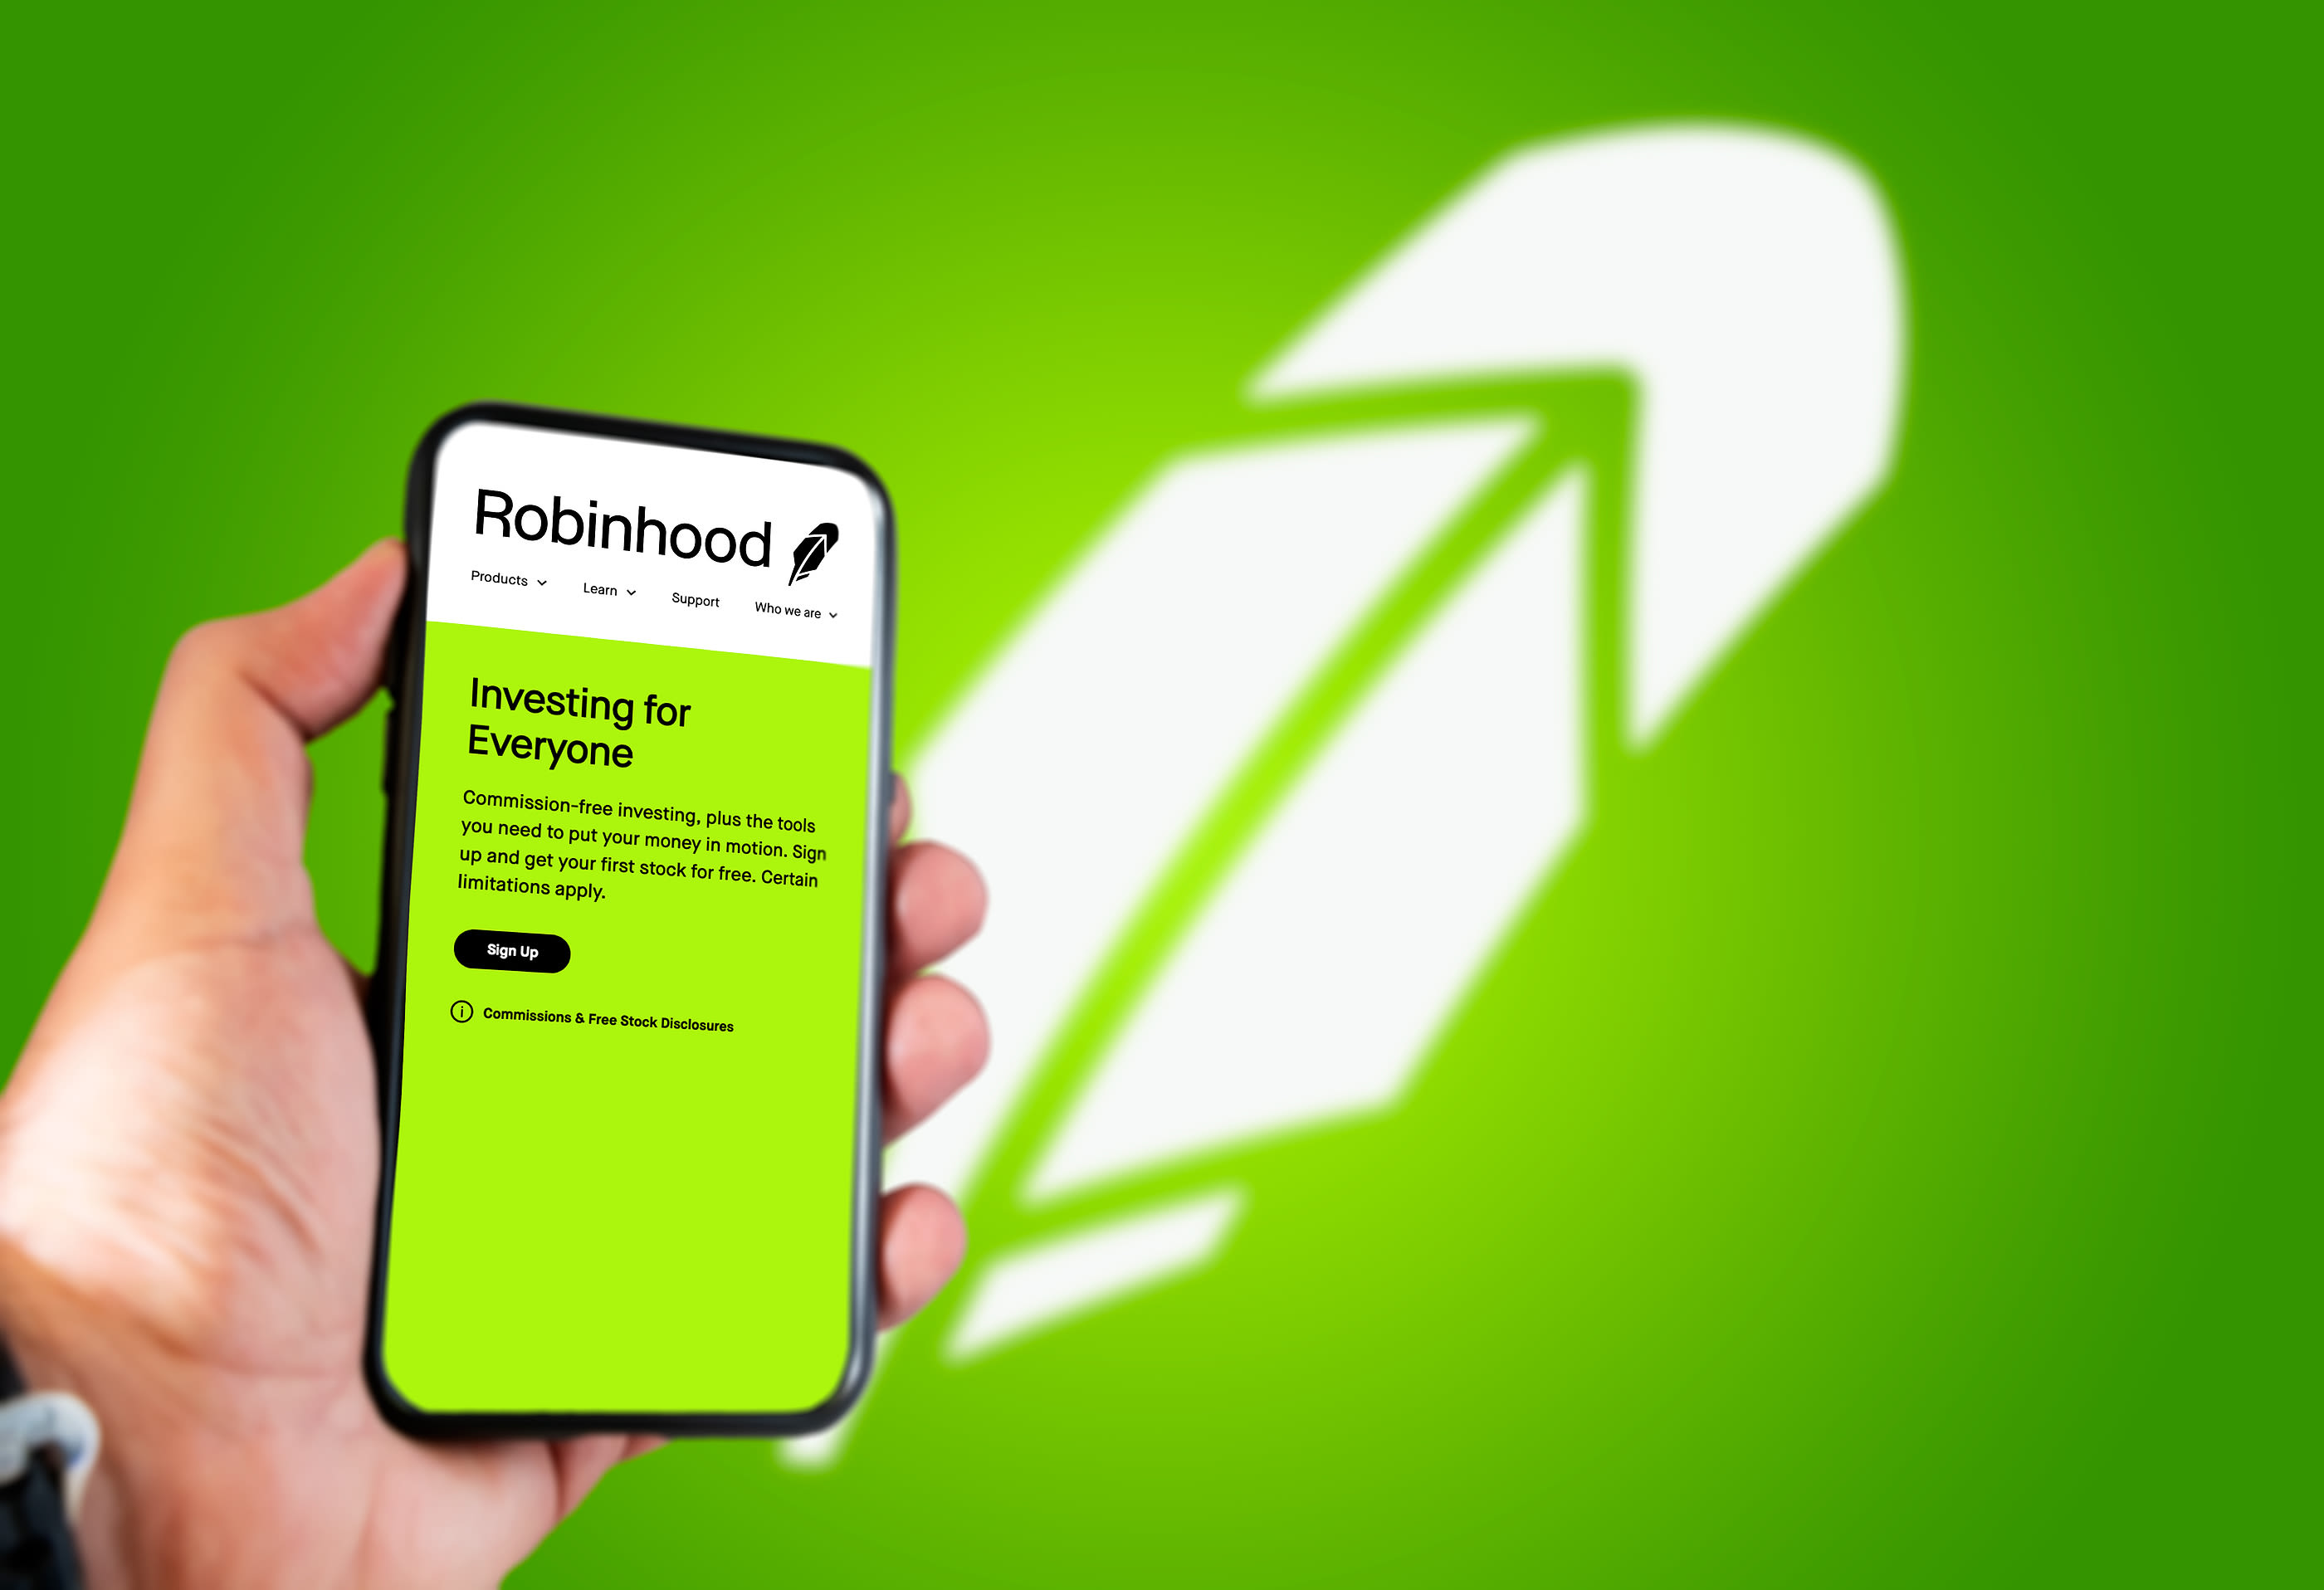 Options Traders Blast Robinhood Stock After Earnings - Schaeffer's Investment Research